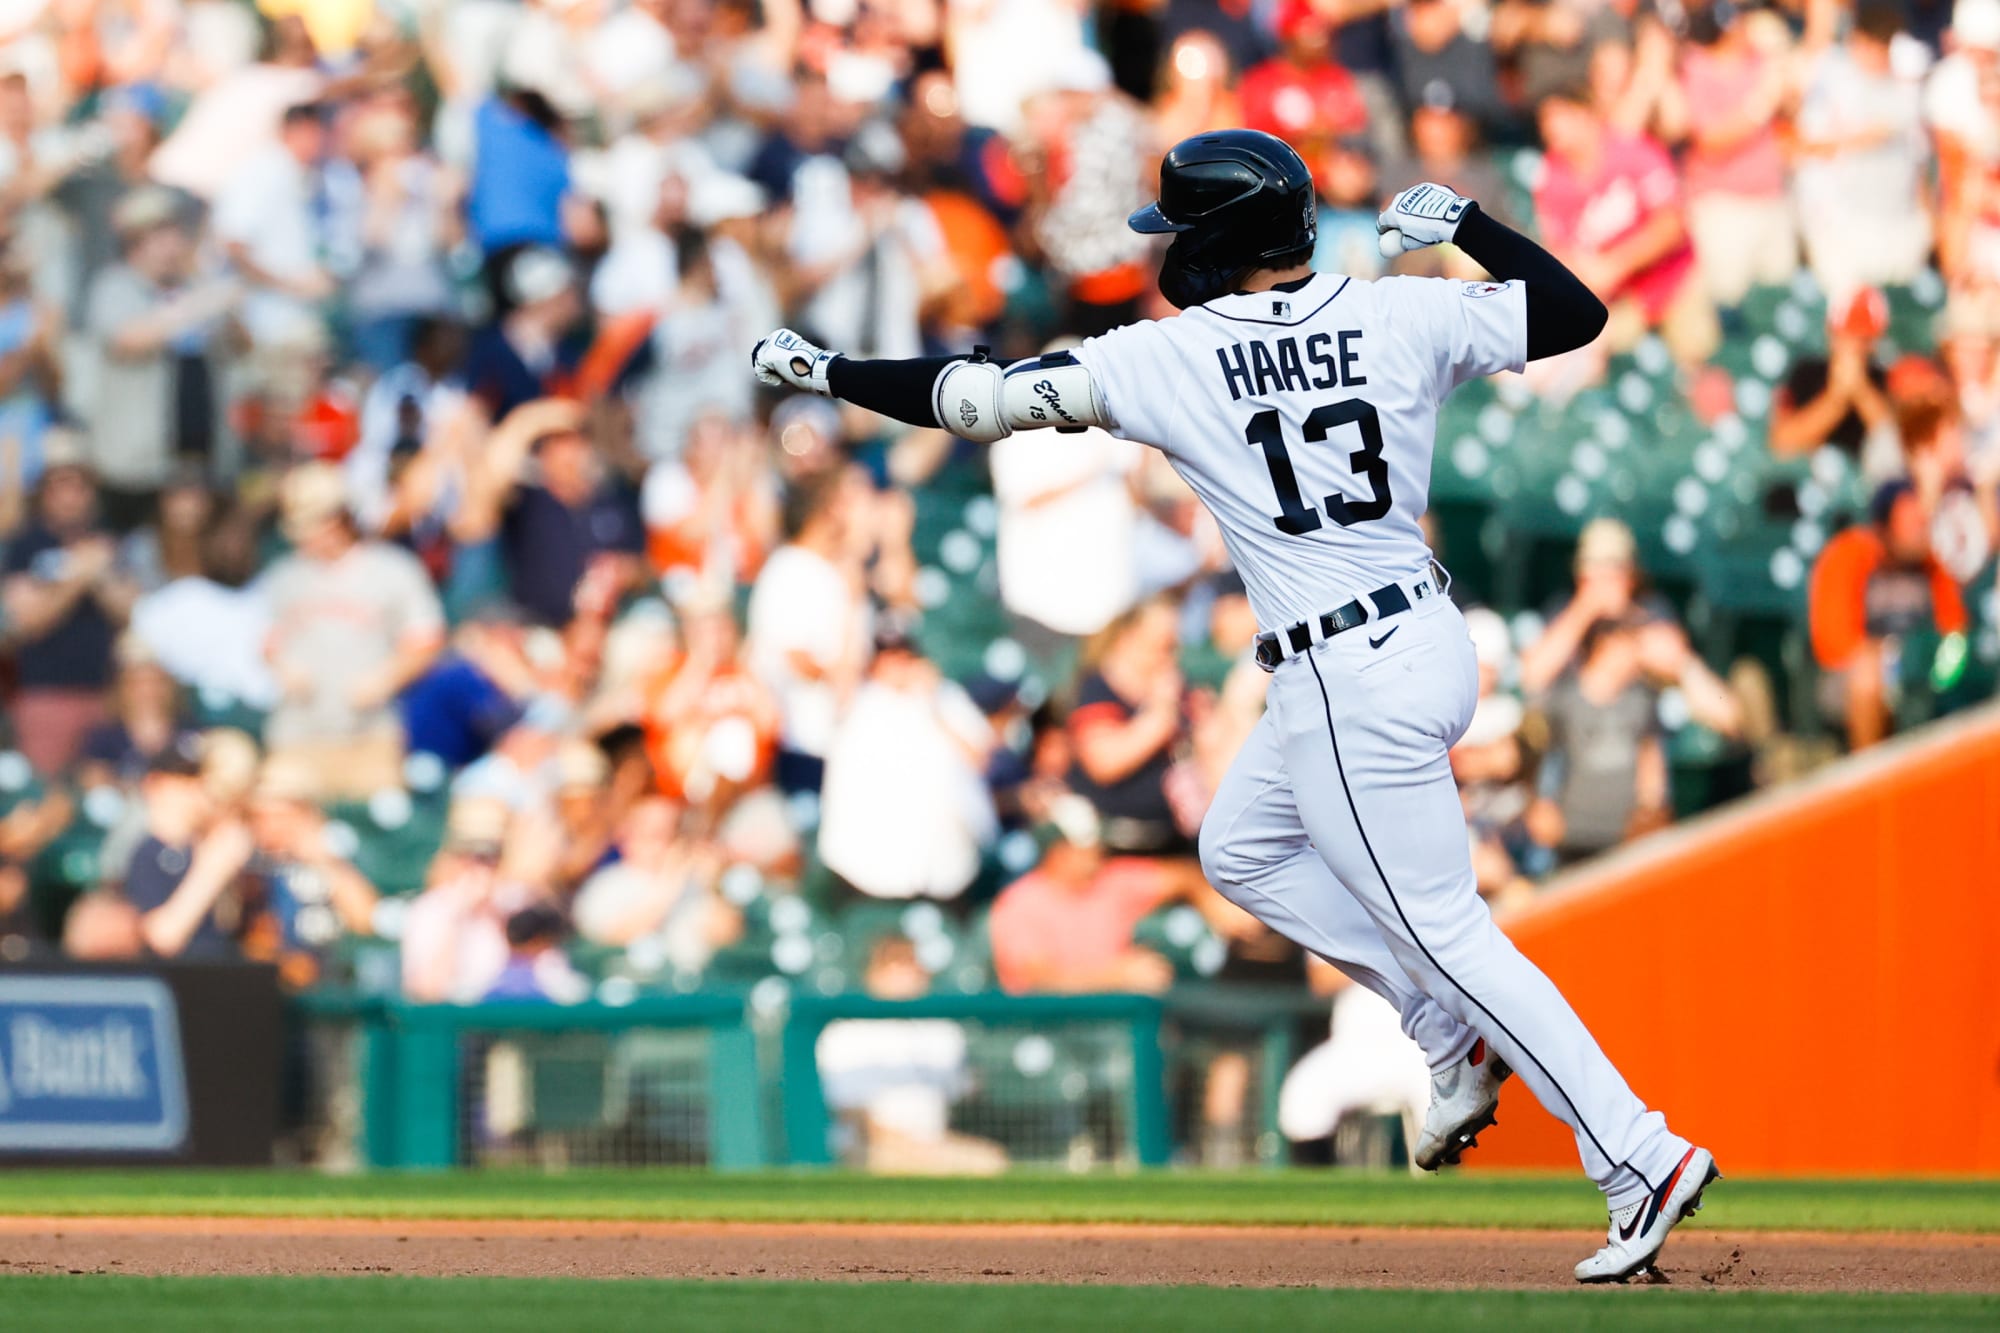 Detroit Tigers minor leaguer Eric Haase on homecoming: 'It's wild